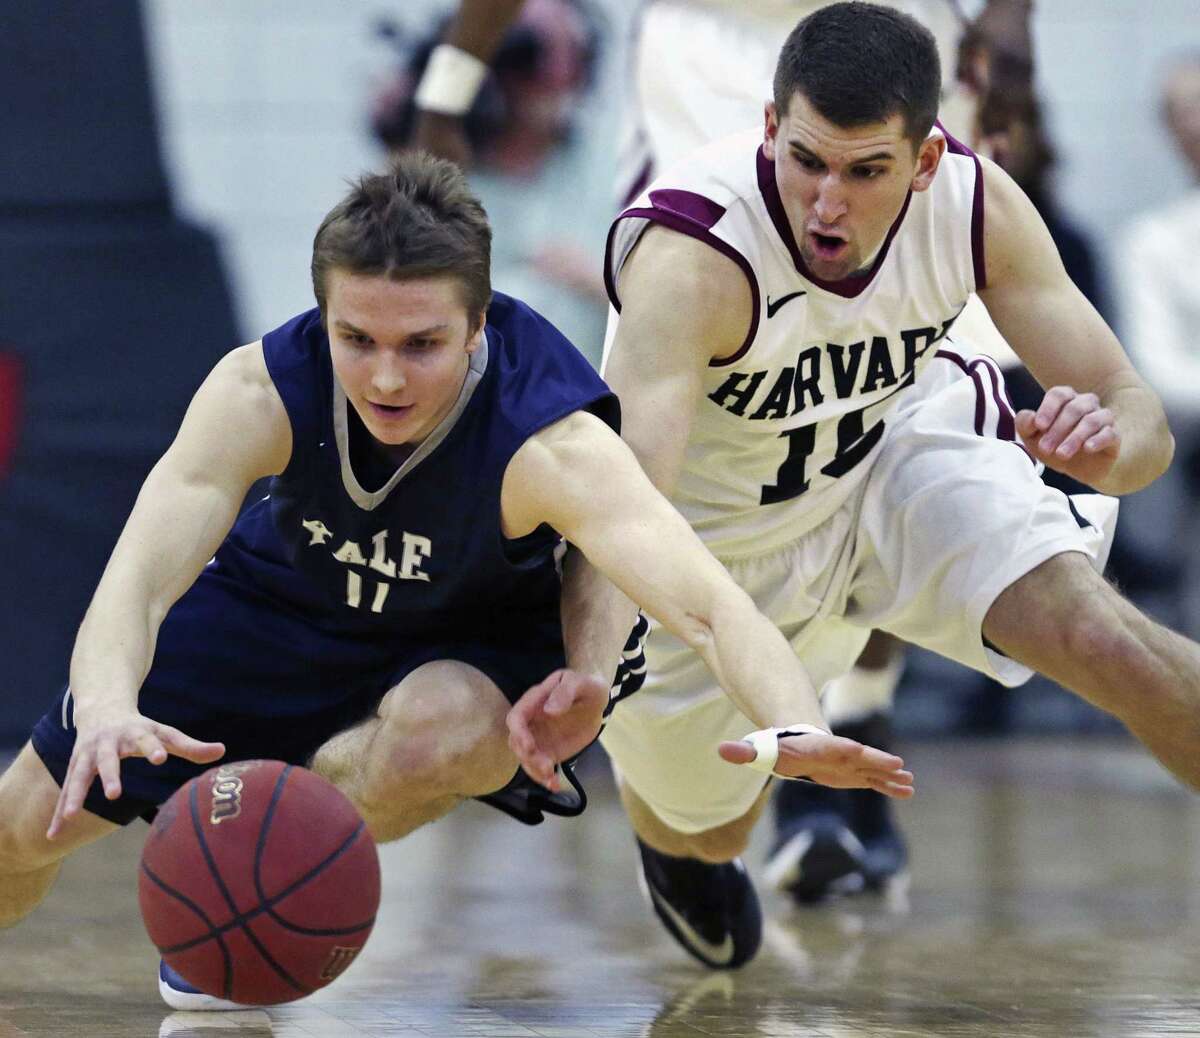 Makai Mason and Yale will take on Corbin Miller and Harvard Saturday in Philadelphia to determine which team makes the trip to the NCAA tournament.